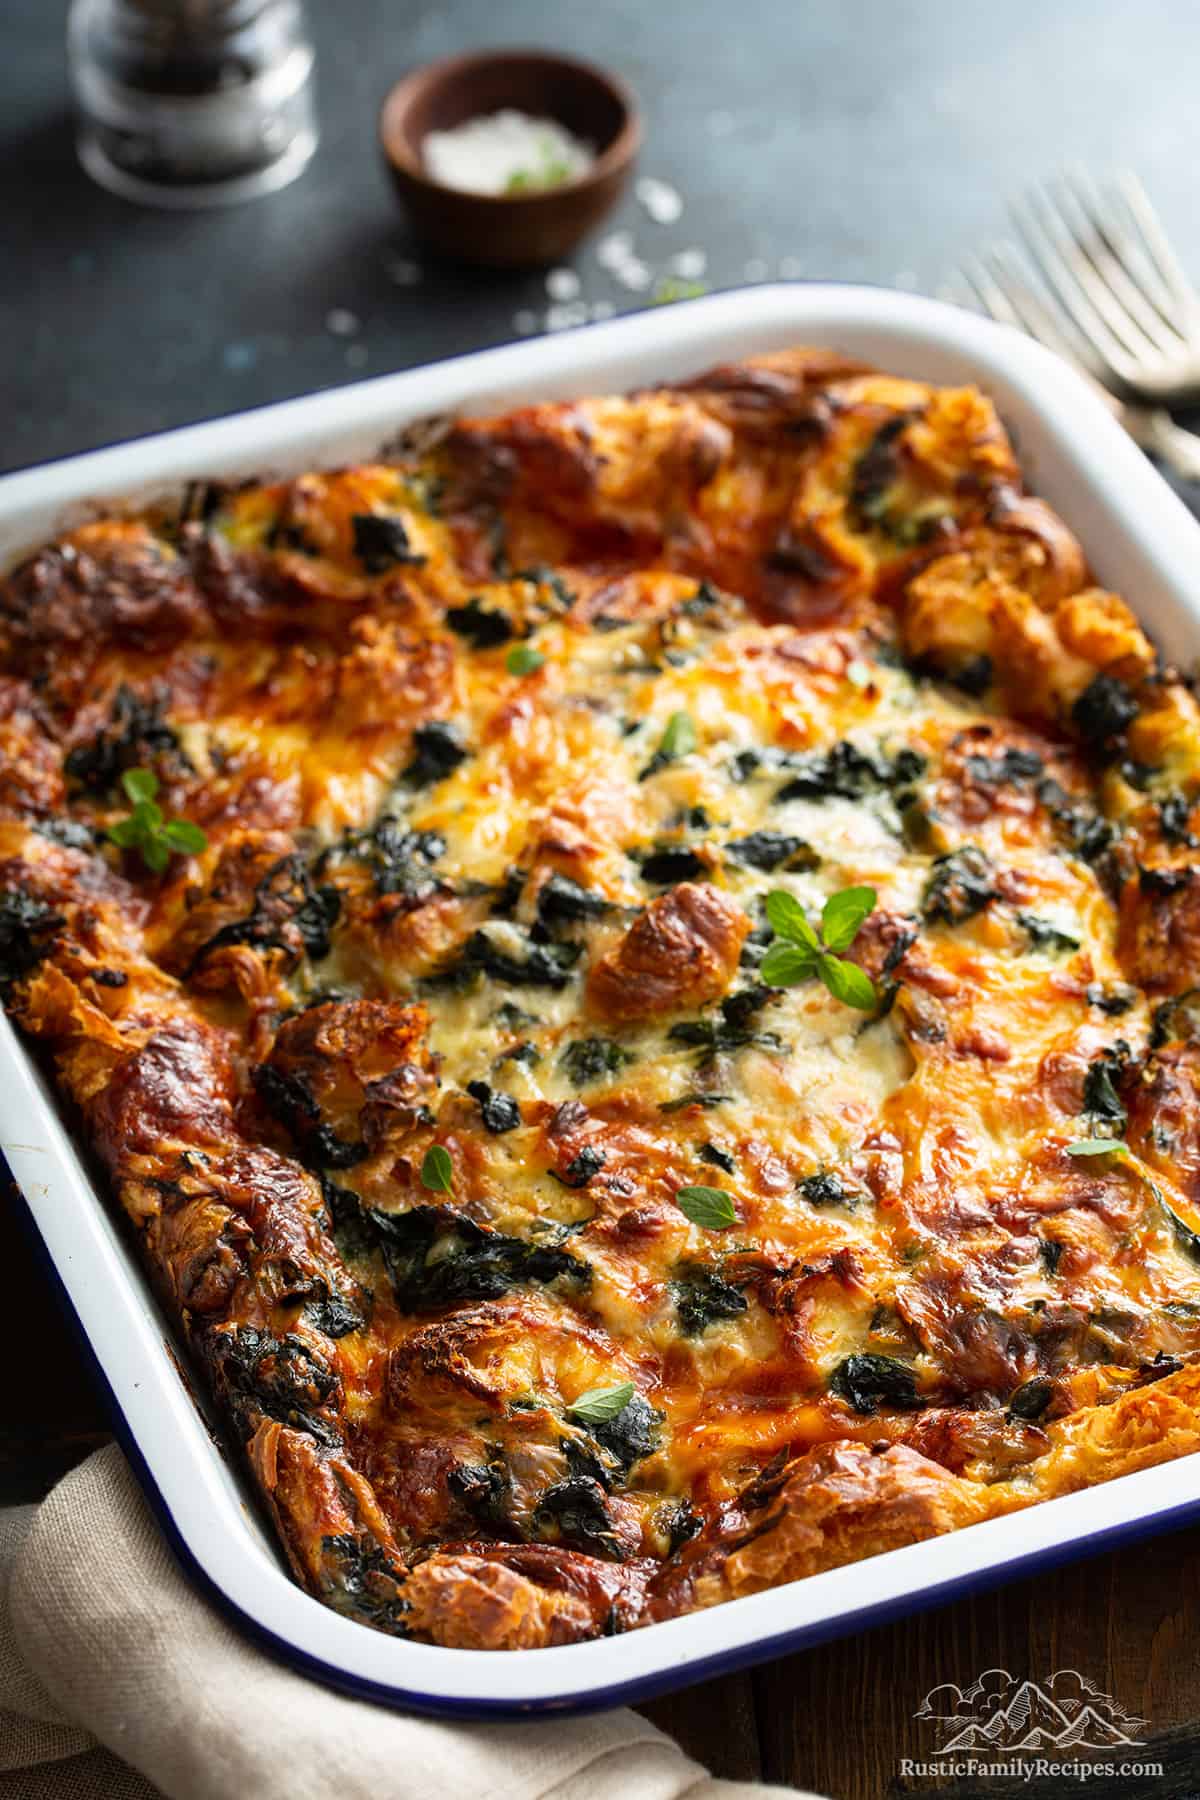 A baked spinach strata in a white baking dish on a wood counter